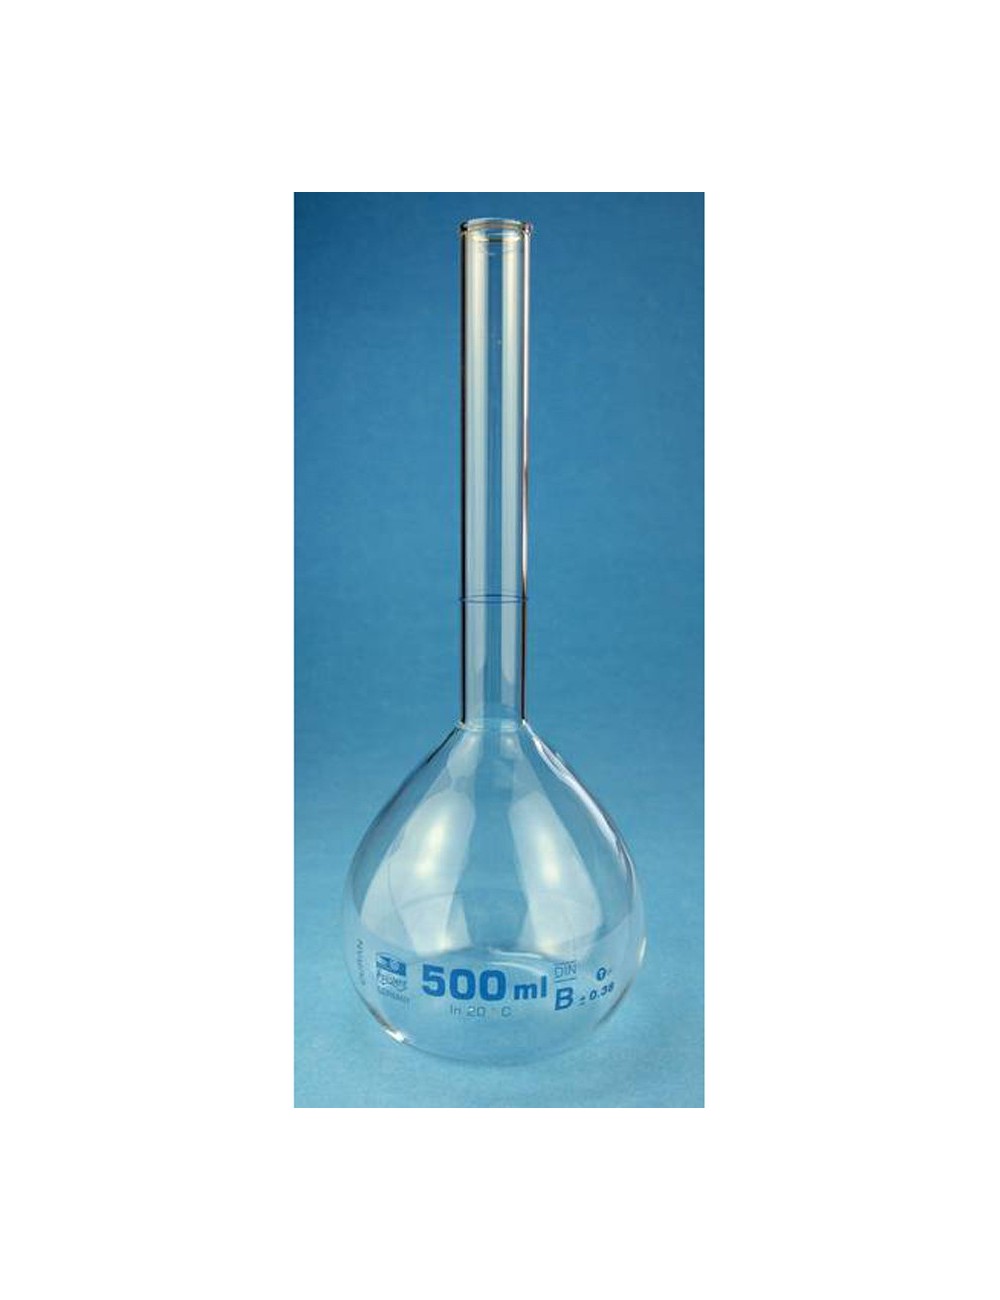 FIOLE JAUGEE COL OUVERT   50 ML